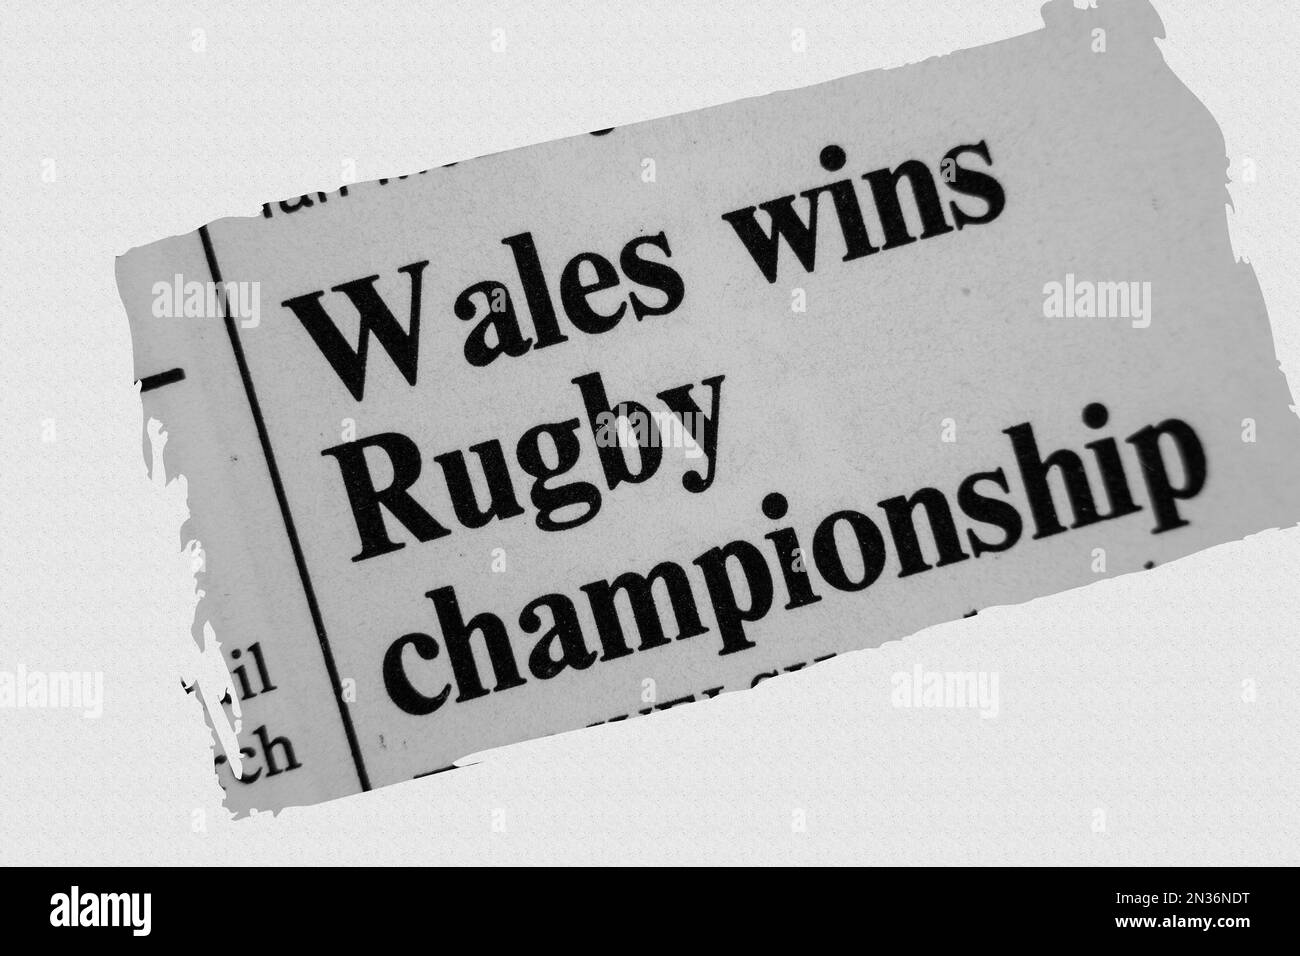 Wales wins Rugby championship - news story from 1975 newspaper headline article title Stock Photo